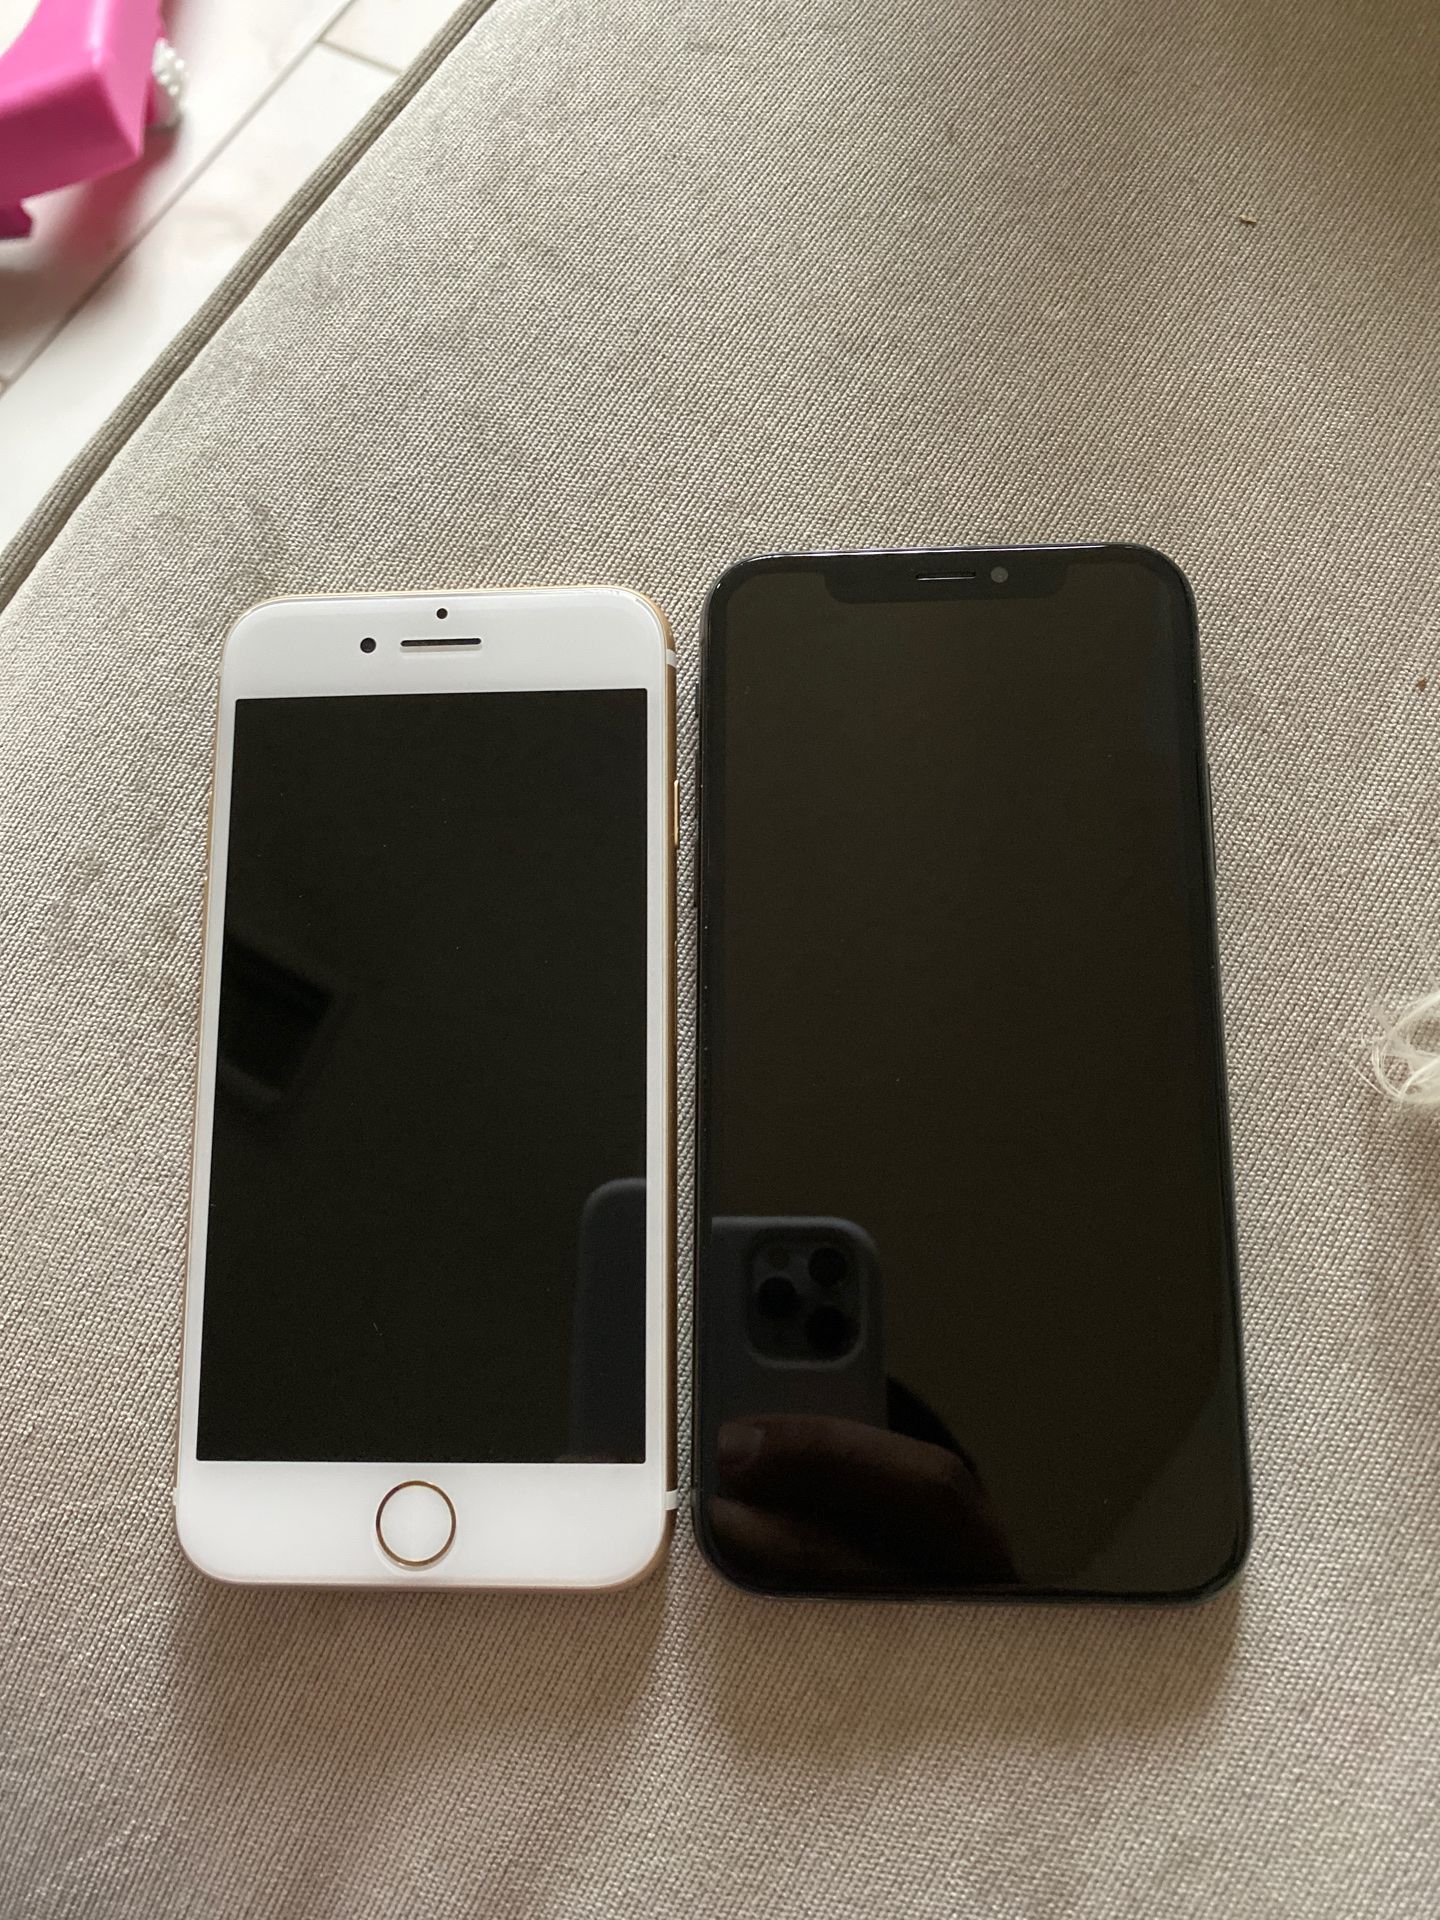 IPhone 7 and iPhone X / with iCloud account